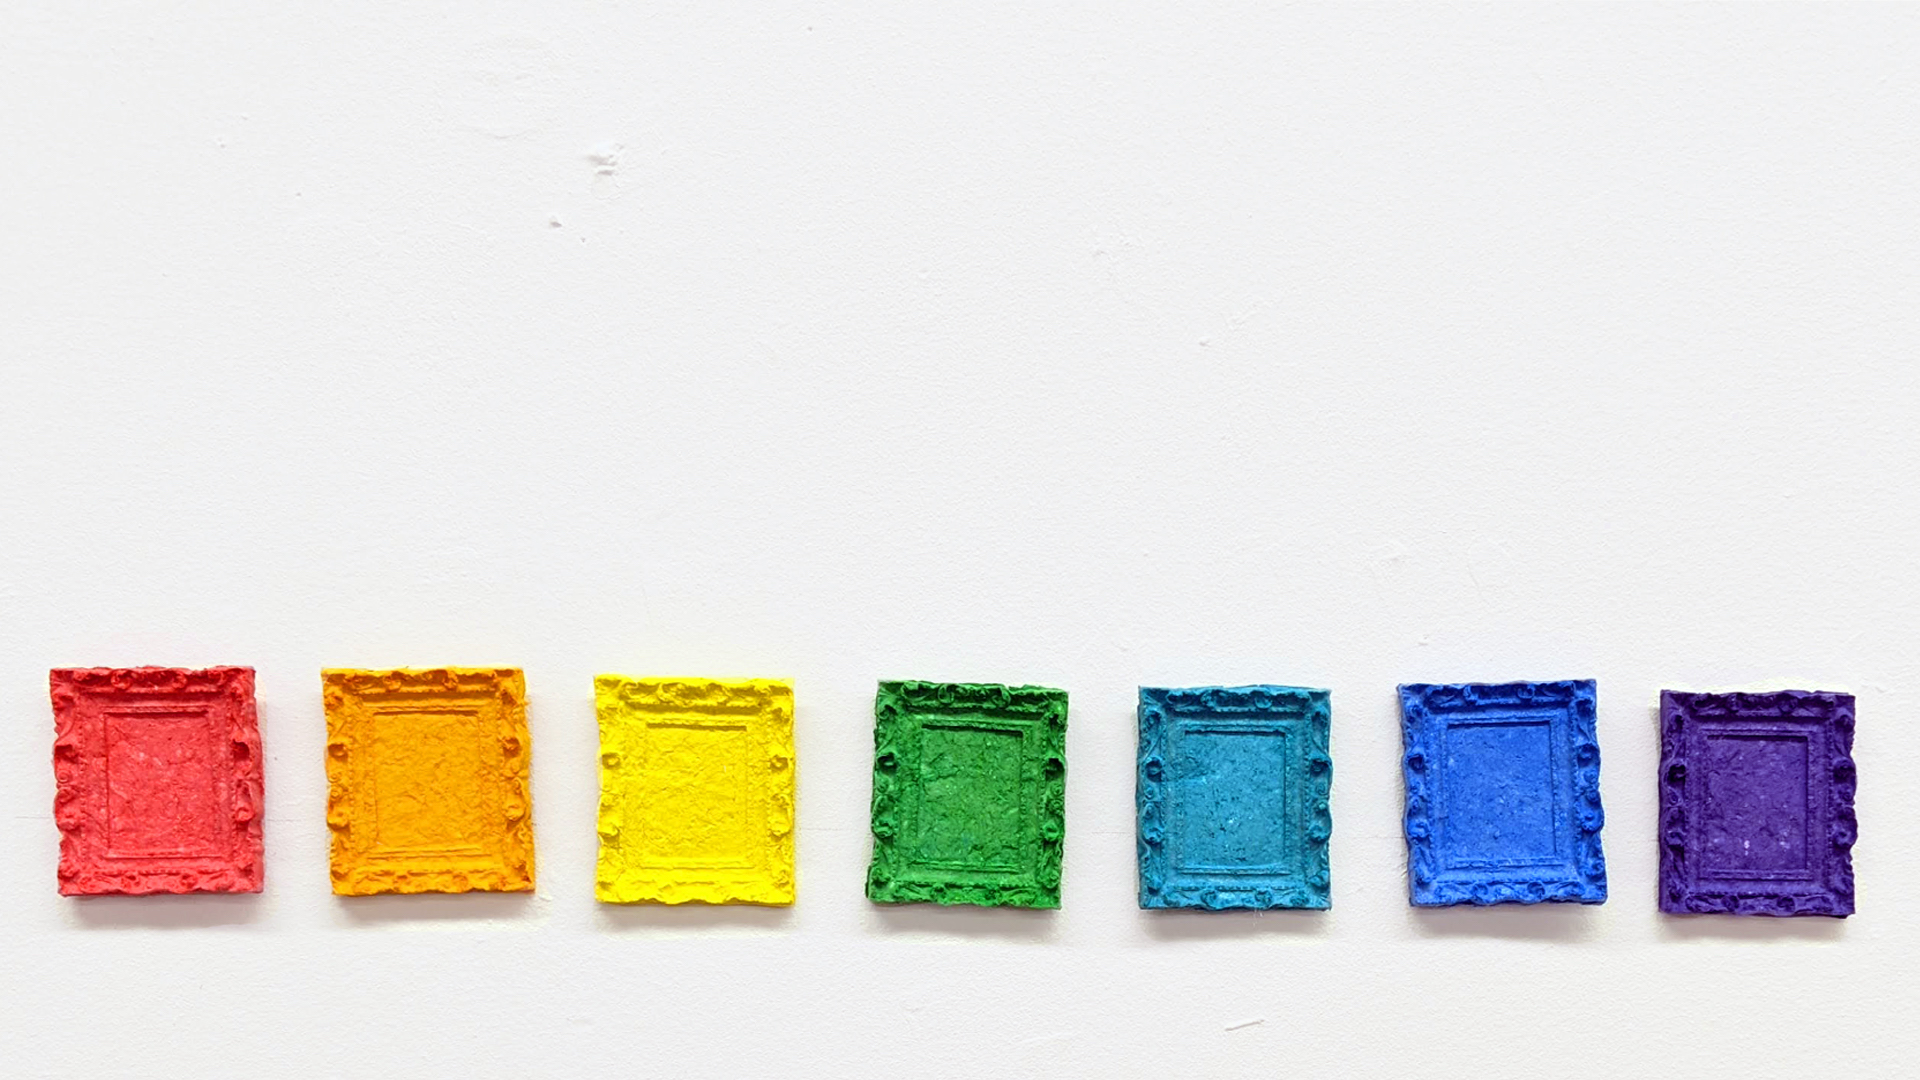 Small blocks of colorful embossed paper against a white backdrop. The paper is in rainbow order: red, orange, yellow, green, blue, indigo, violet